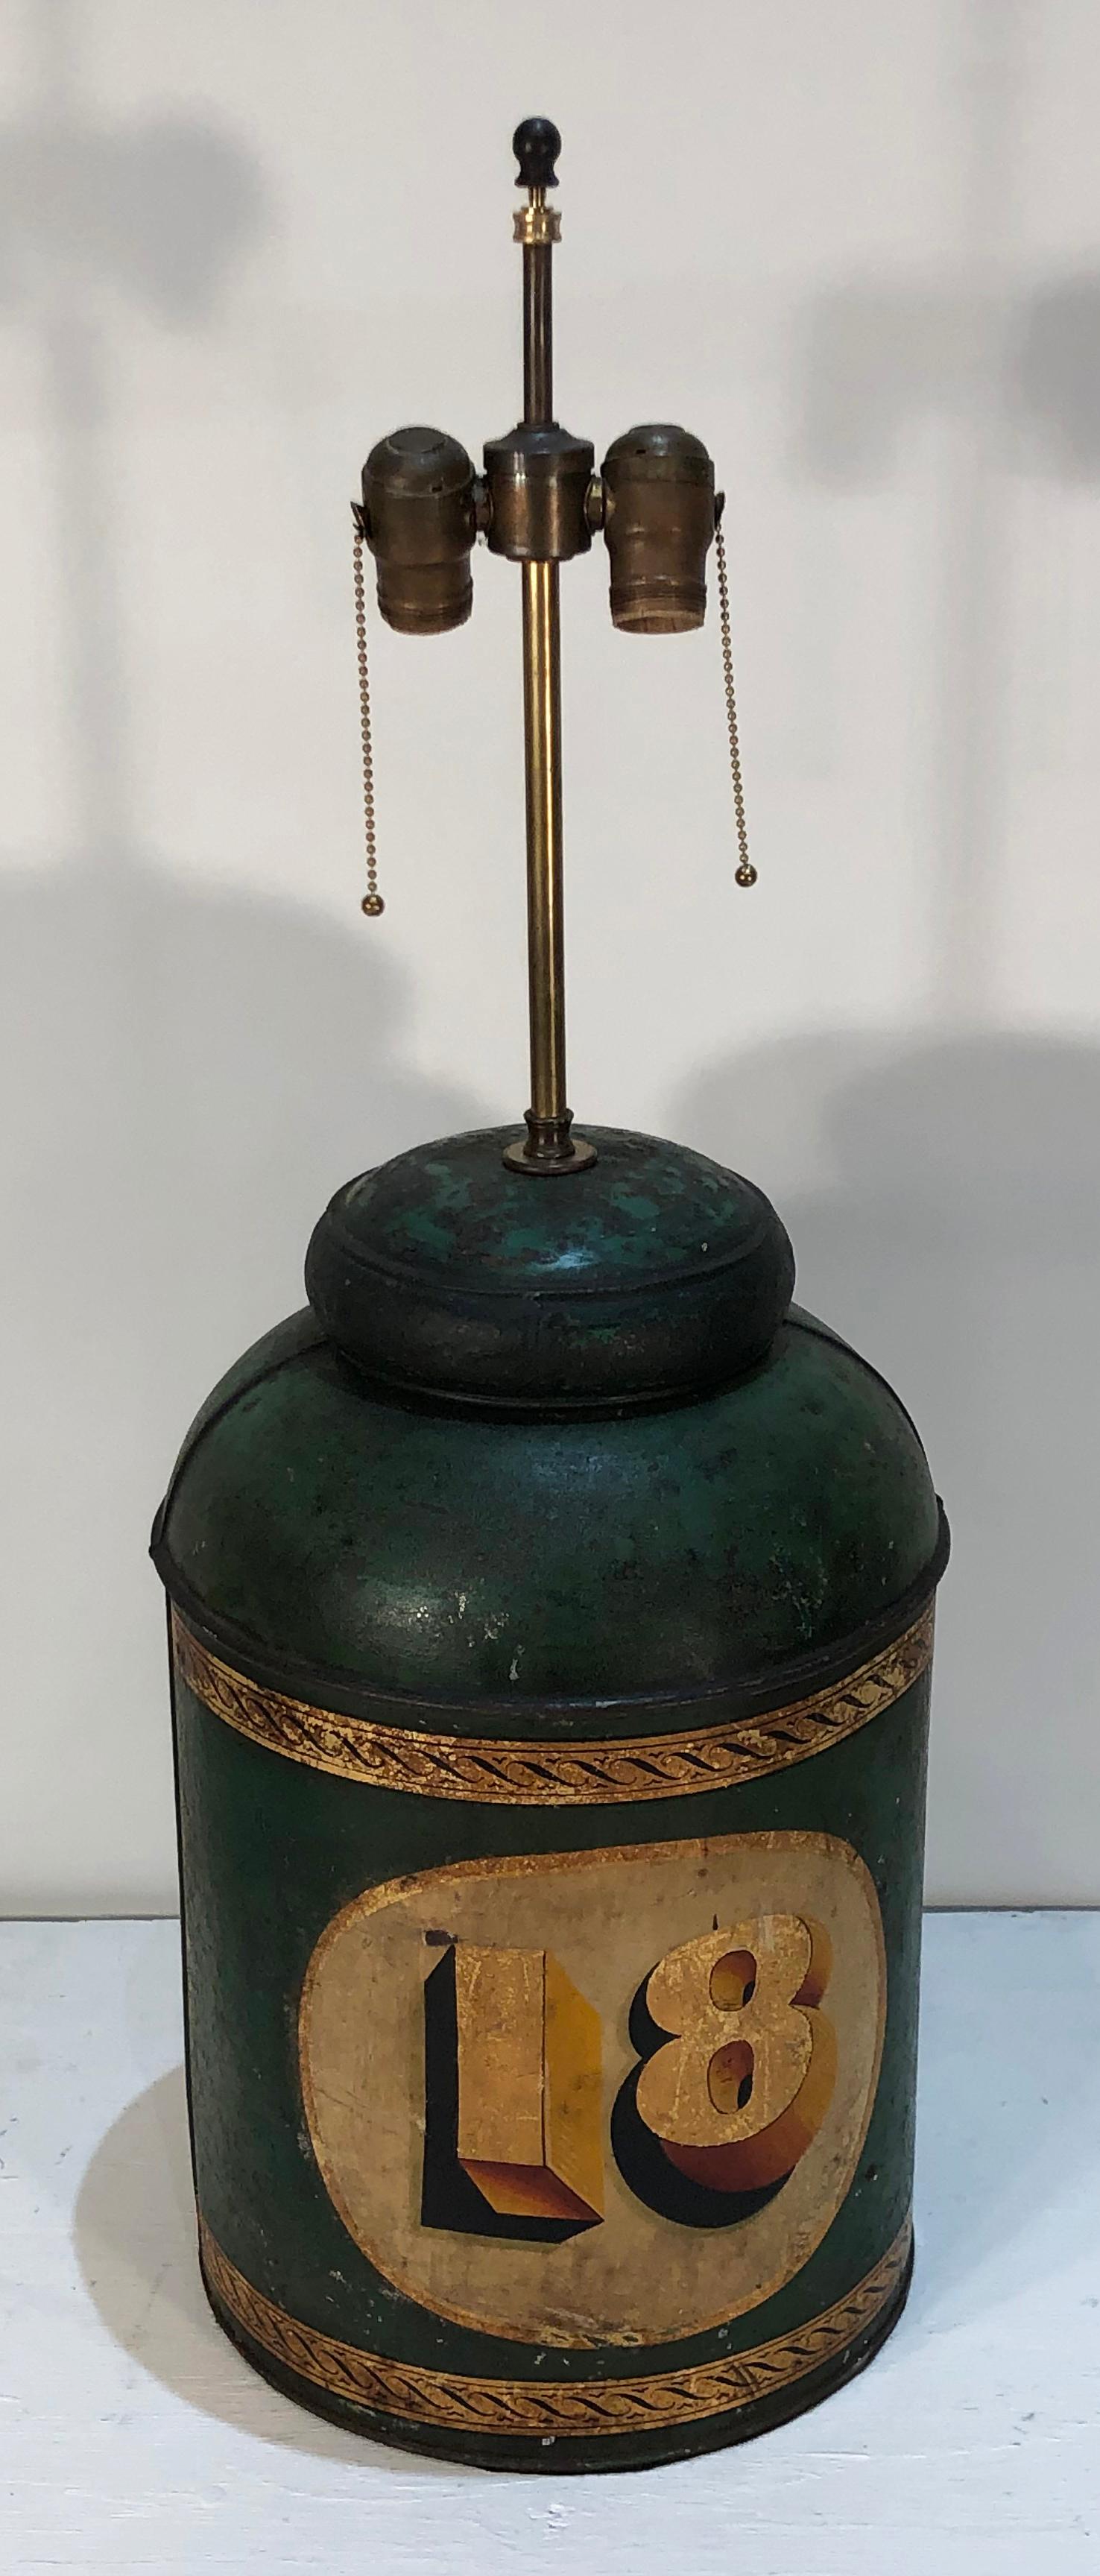 Tôle Mid-19th Century English Tole Spice or Tea Canister, Now as a Lamp